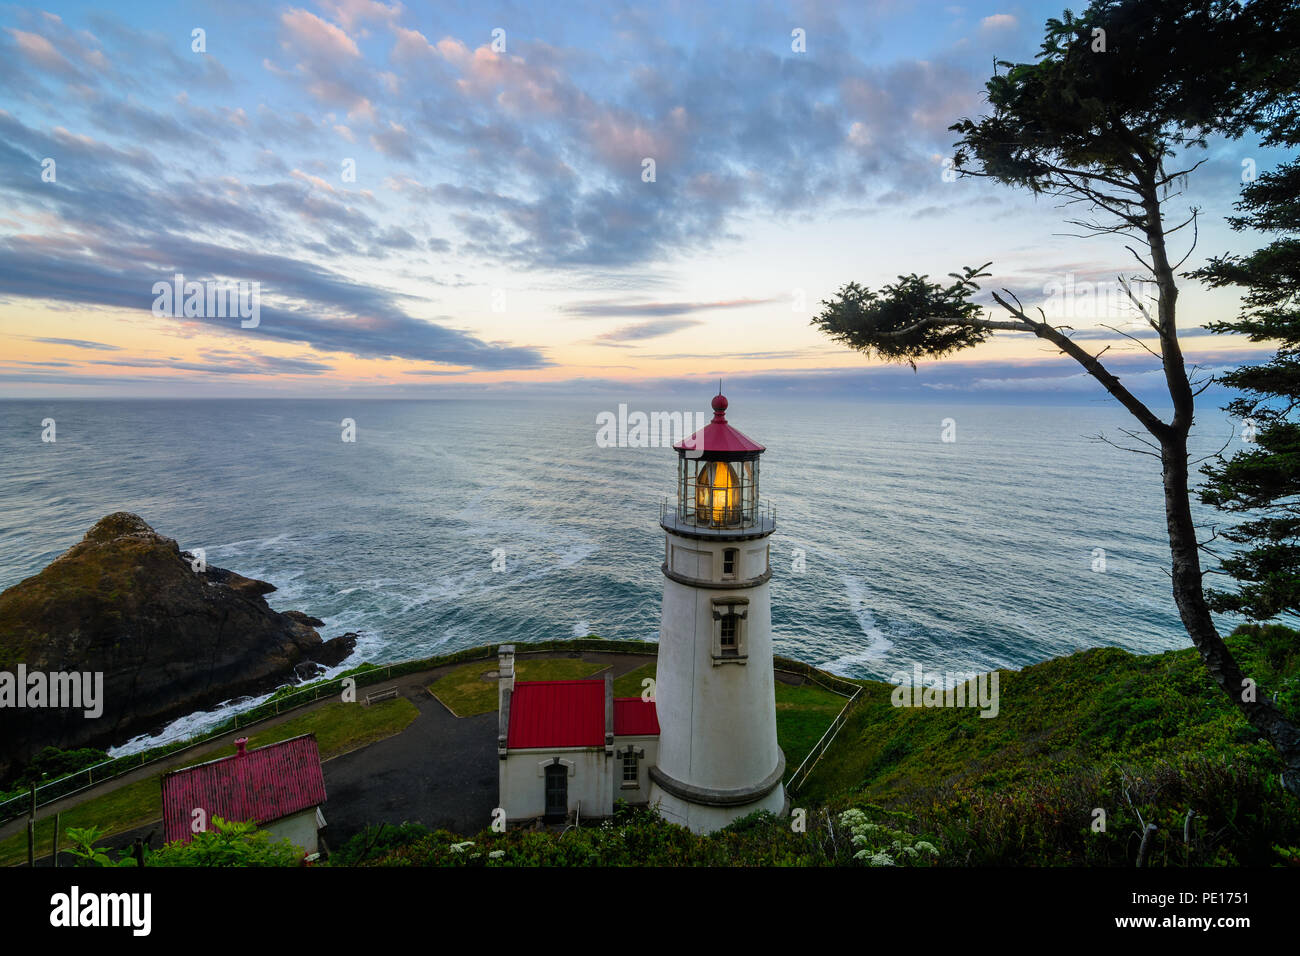 Bands of clouds float over Heceta Head Lighthouse along the shore of the Pacific Ocean along the Central Oregon Coast in June 2018. Stock Photo